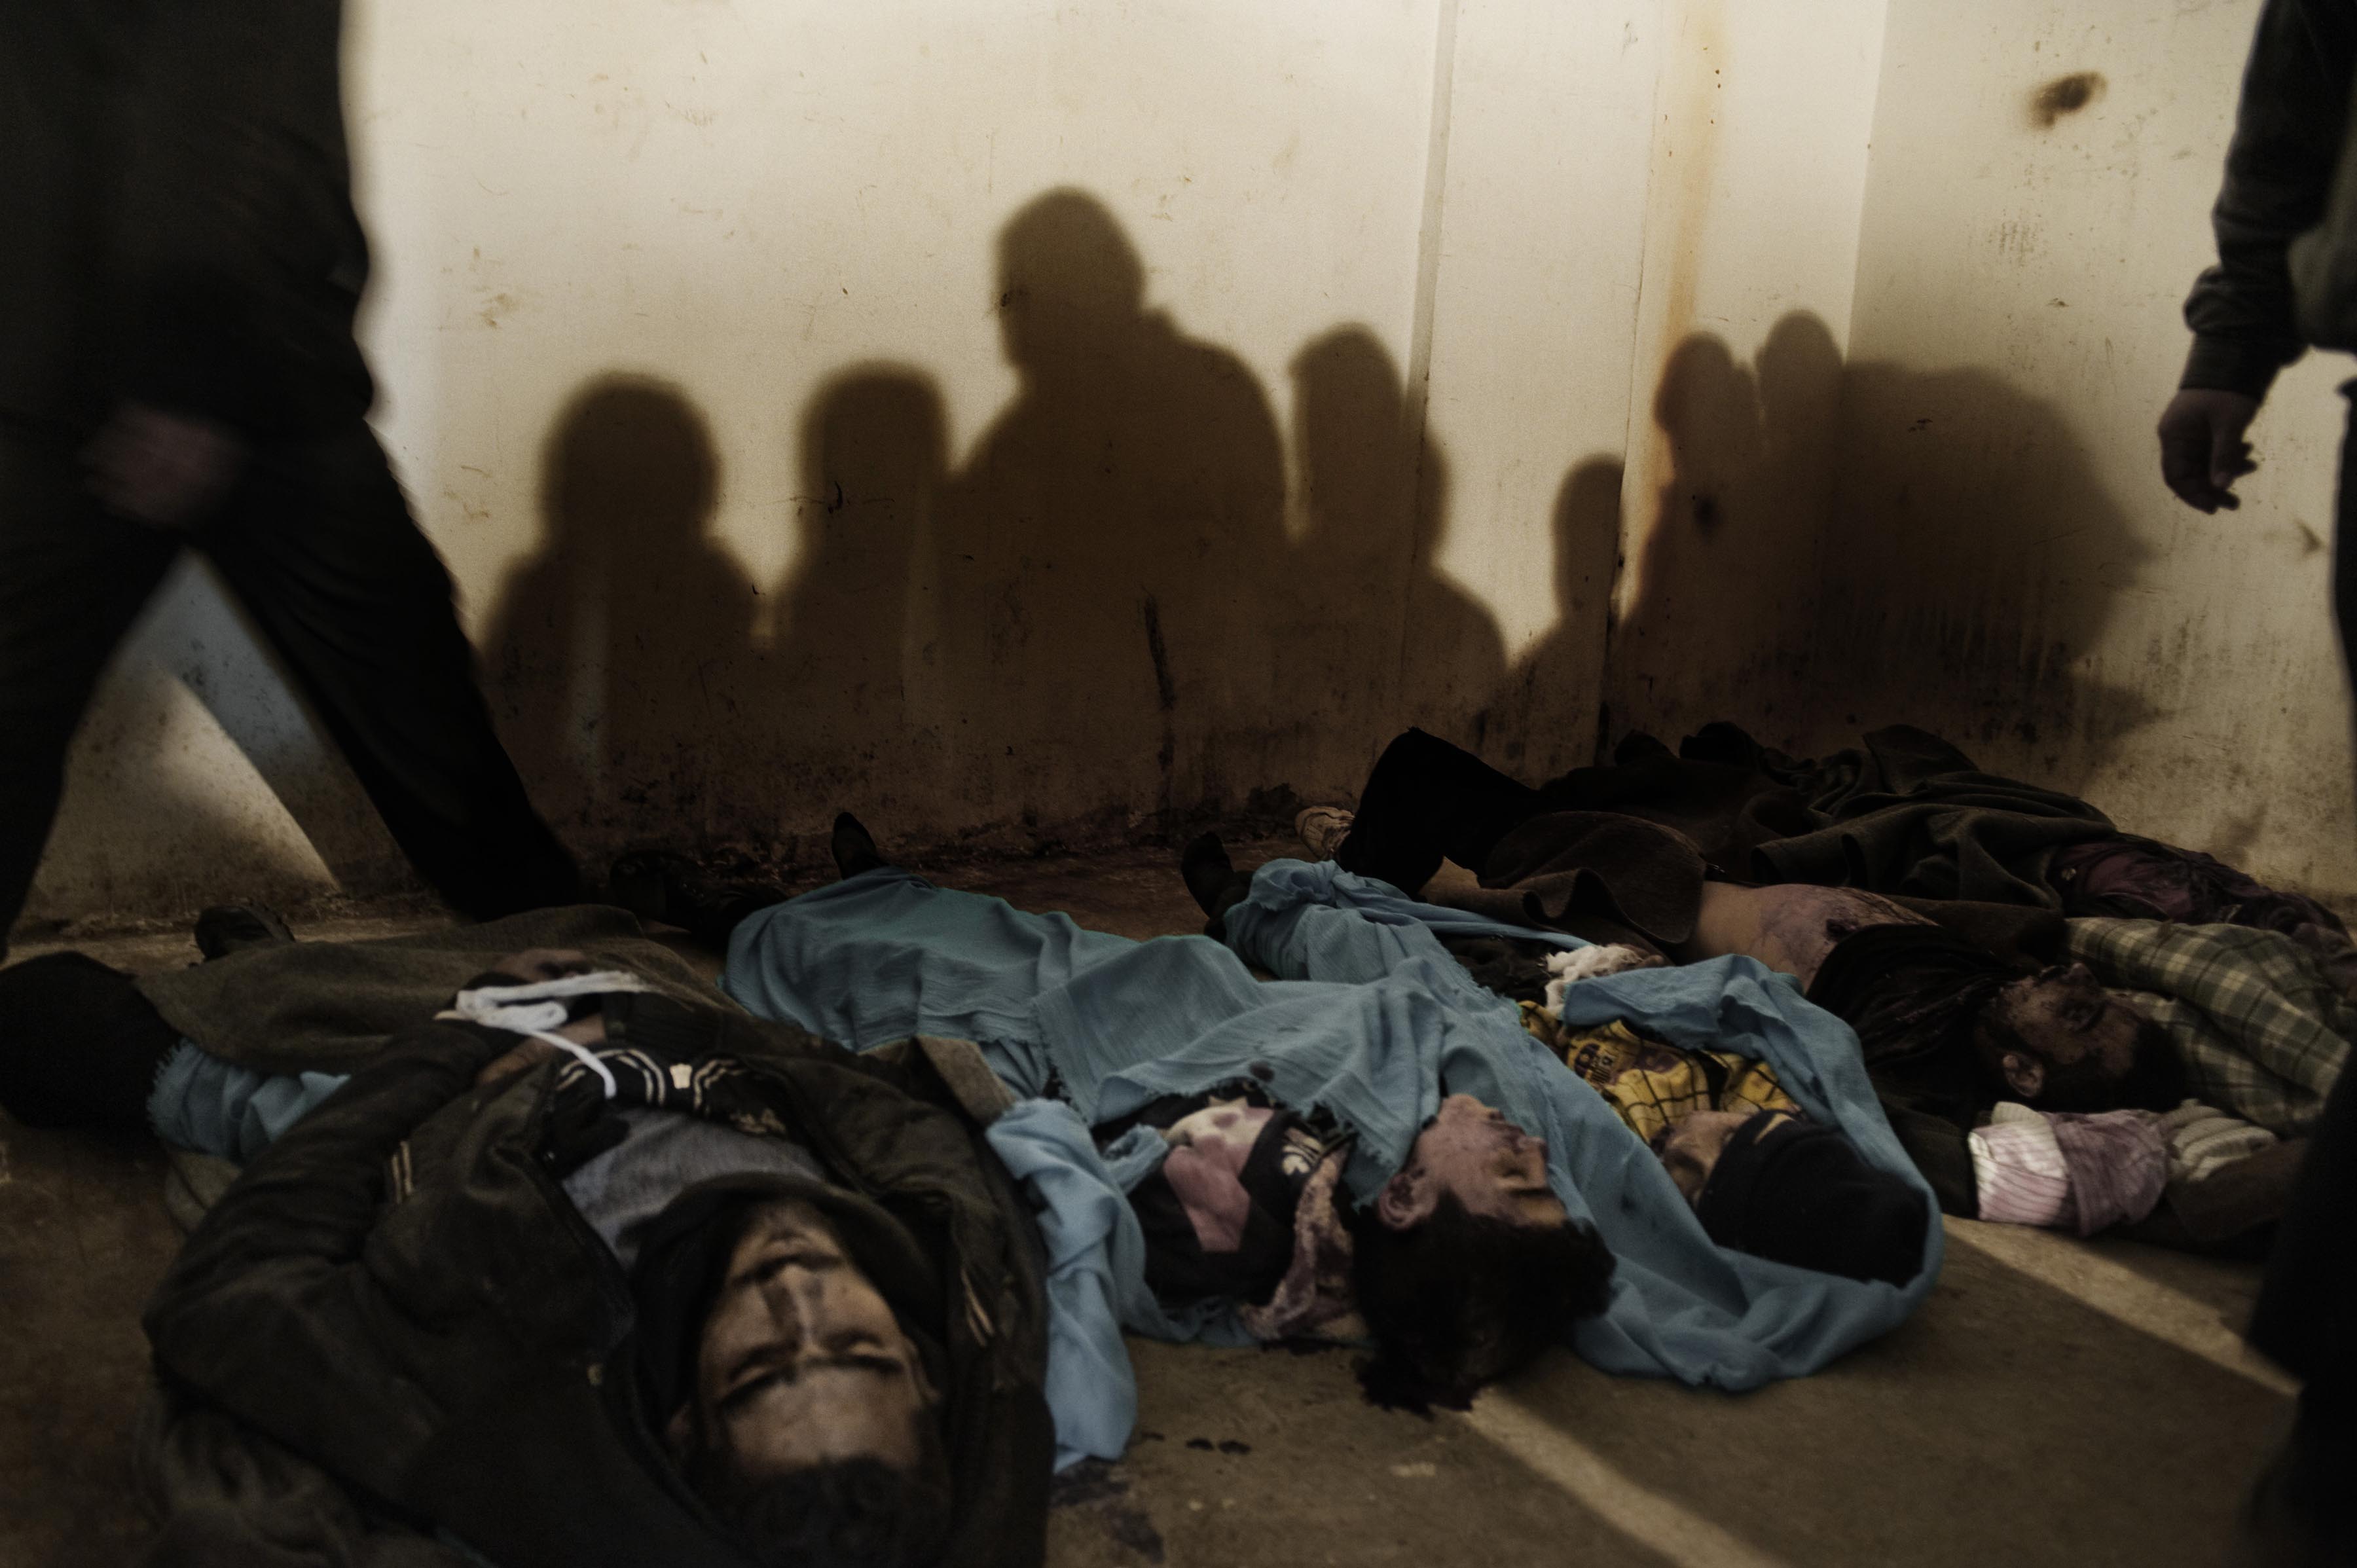 Feb. 20, 2012. Five dead bodies of civilians killed by a mortar, among them two children, lie in a refrigerator used by the resistance as a morgue in Homs Province.